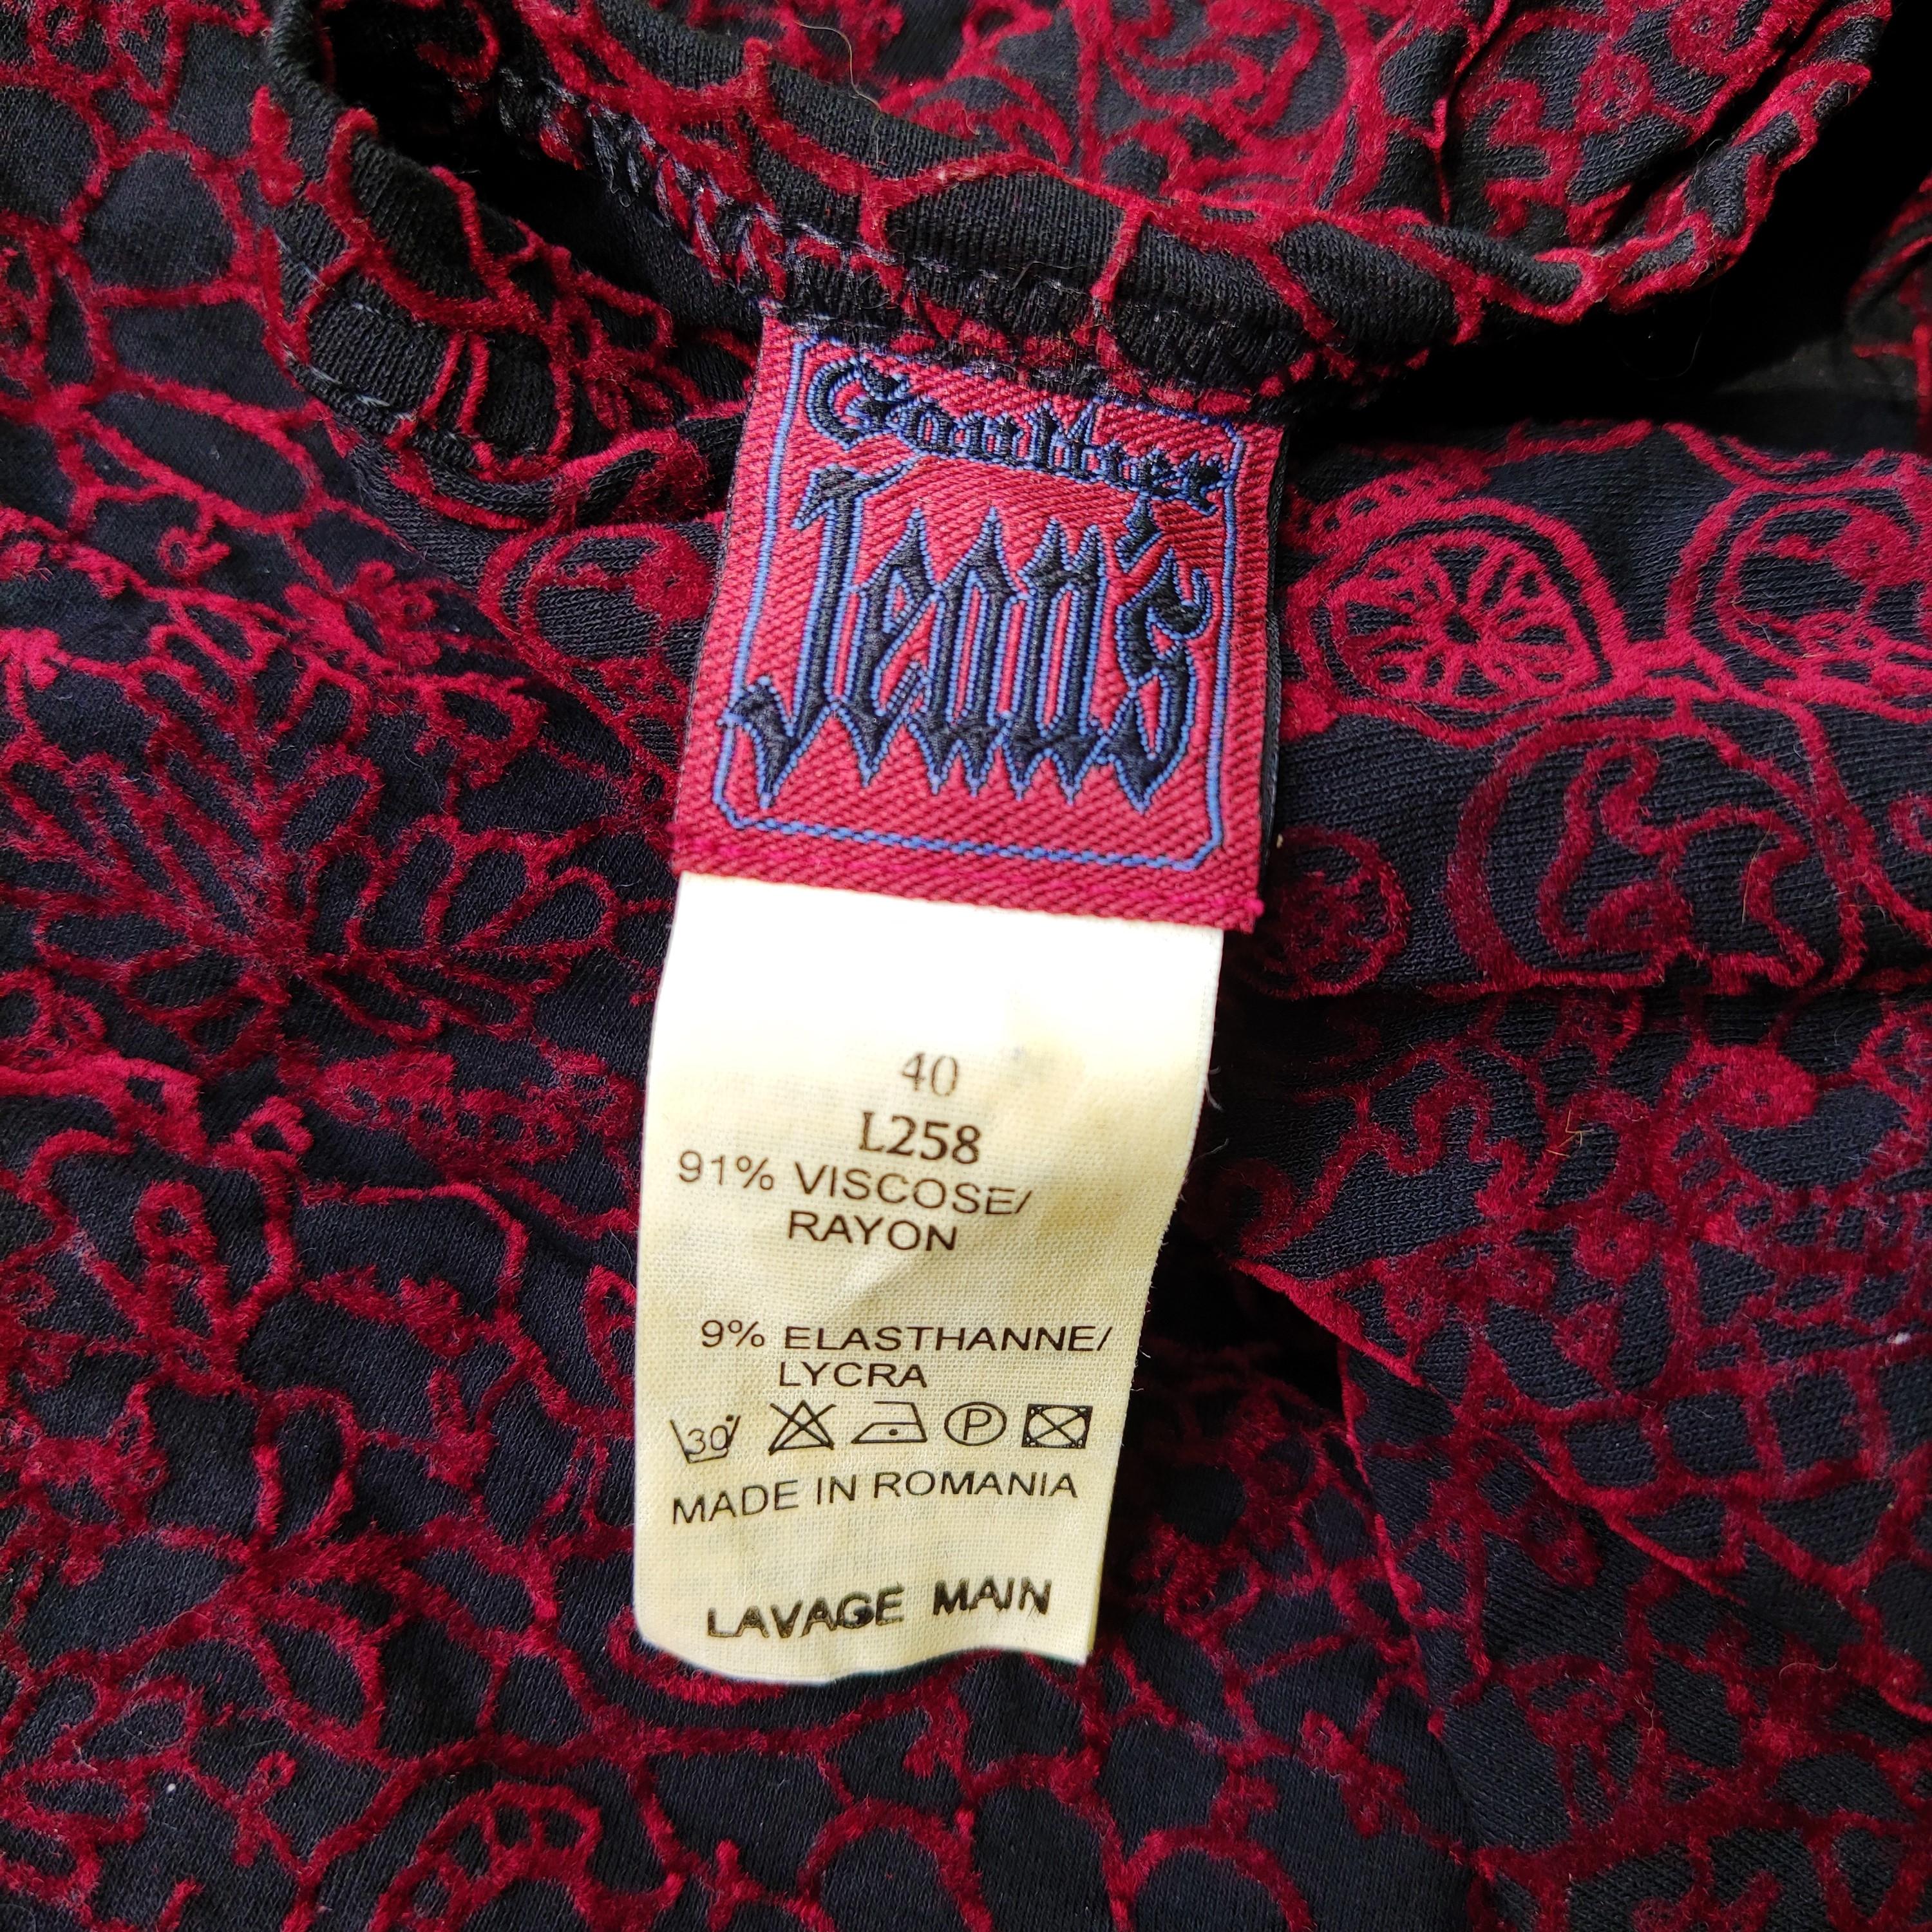 Jean Paul Gaultier Jean's Floral Red Black Tattoo Vintage 90s Maxi Long Dress For Sale 9